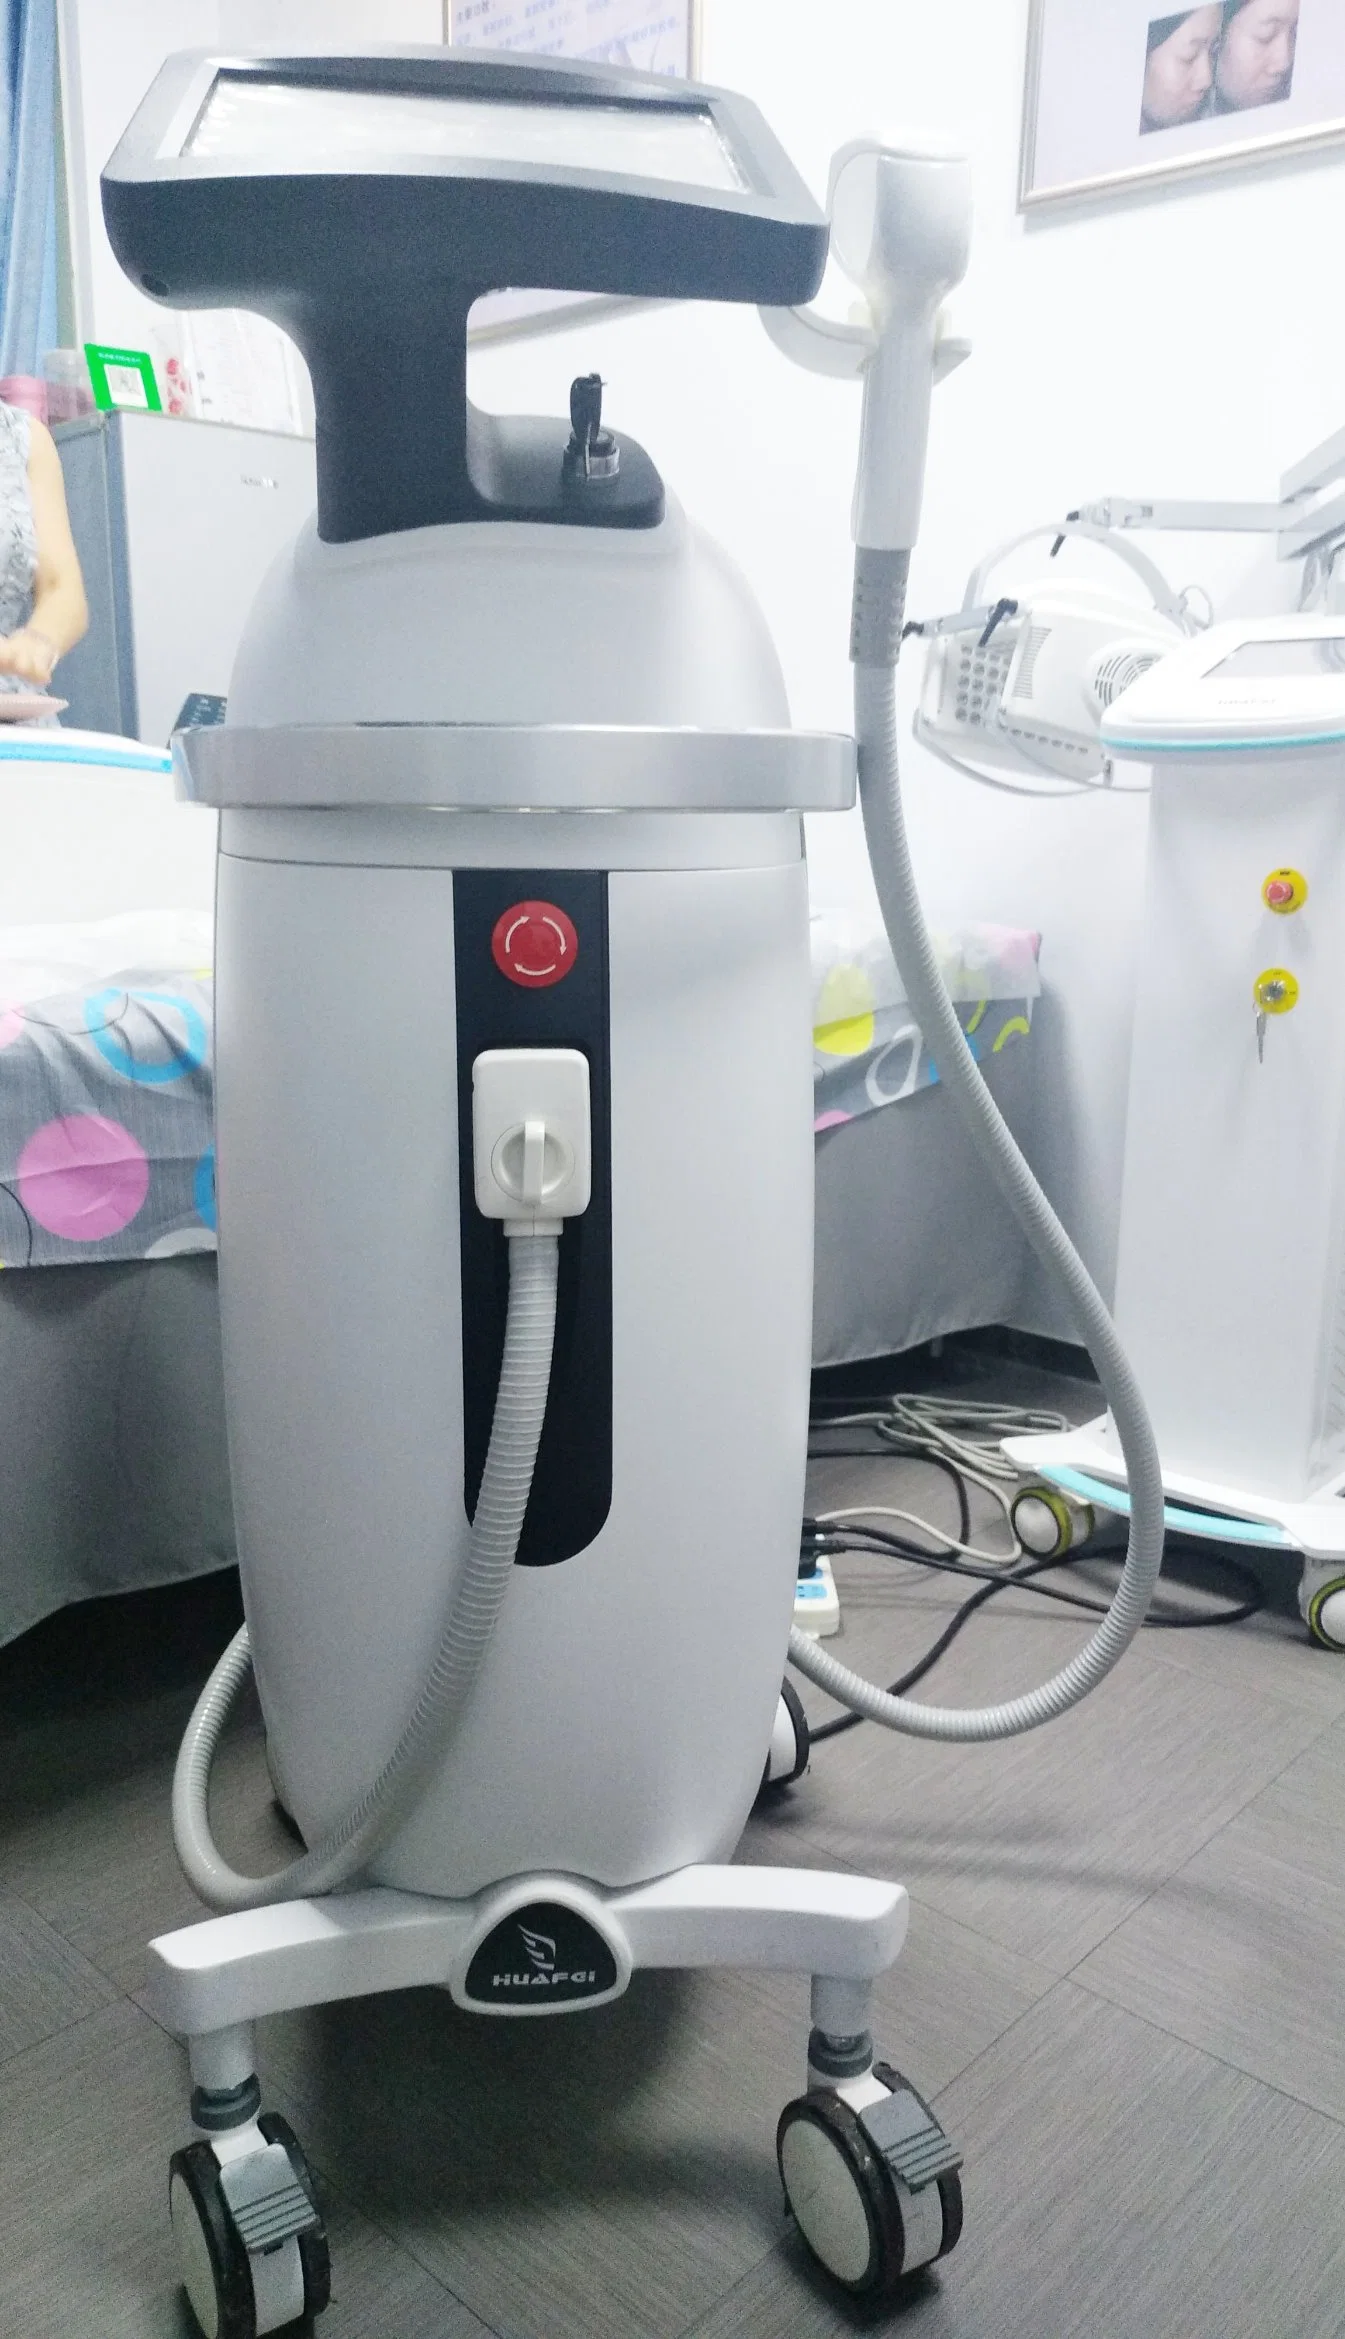 Diode Laser Hair Removal Beauty Machine Beauty Salon Equipment Skin Care